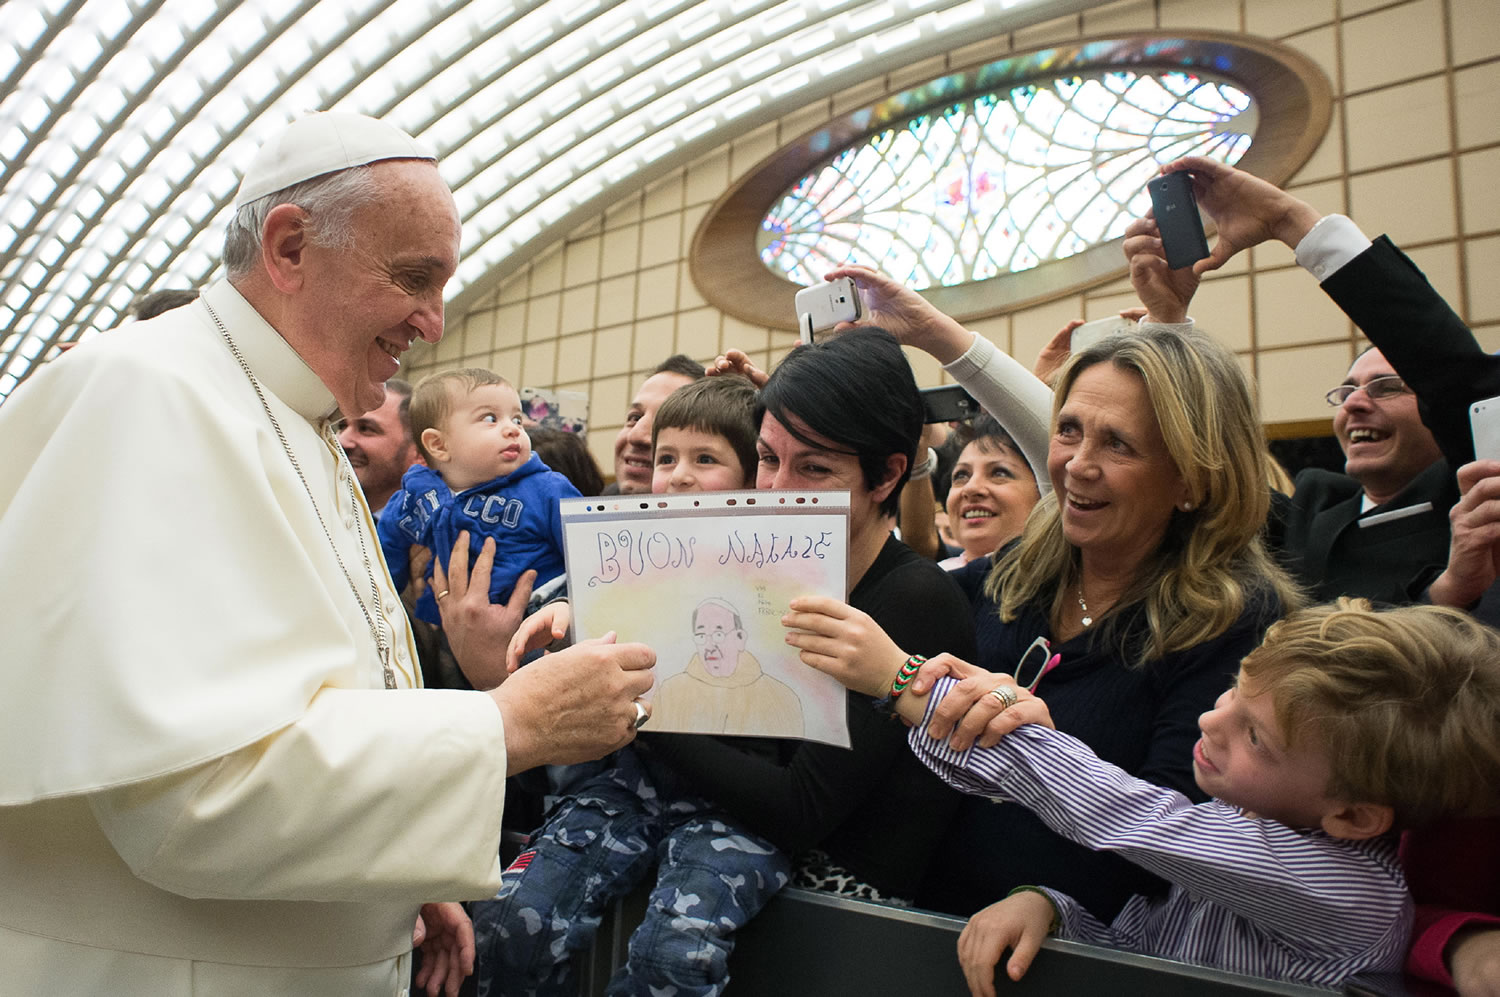 In this picture made available by the Vatican newspaper L' Osservatore Romano, Pope Francis is presented by a child with a drawing depicting a Pope's portrait and a writing which reads Merry Christmas, during an audience with the Holy See's employees in the Paul VI hall at the Vatican, Monday, Dec. 22, 2014.